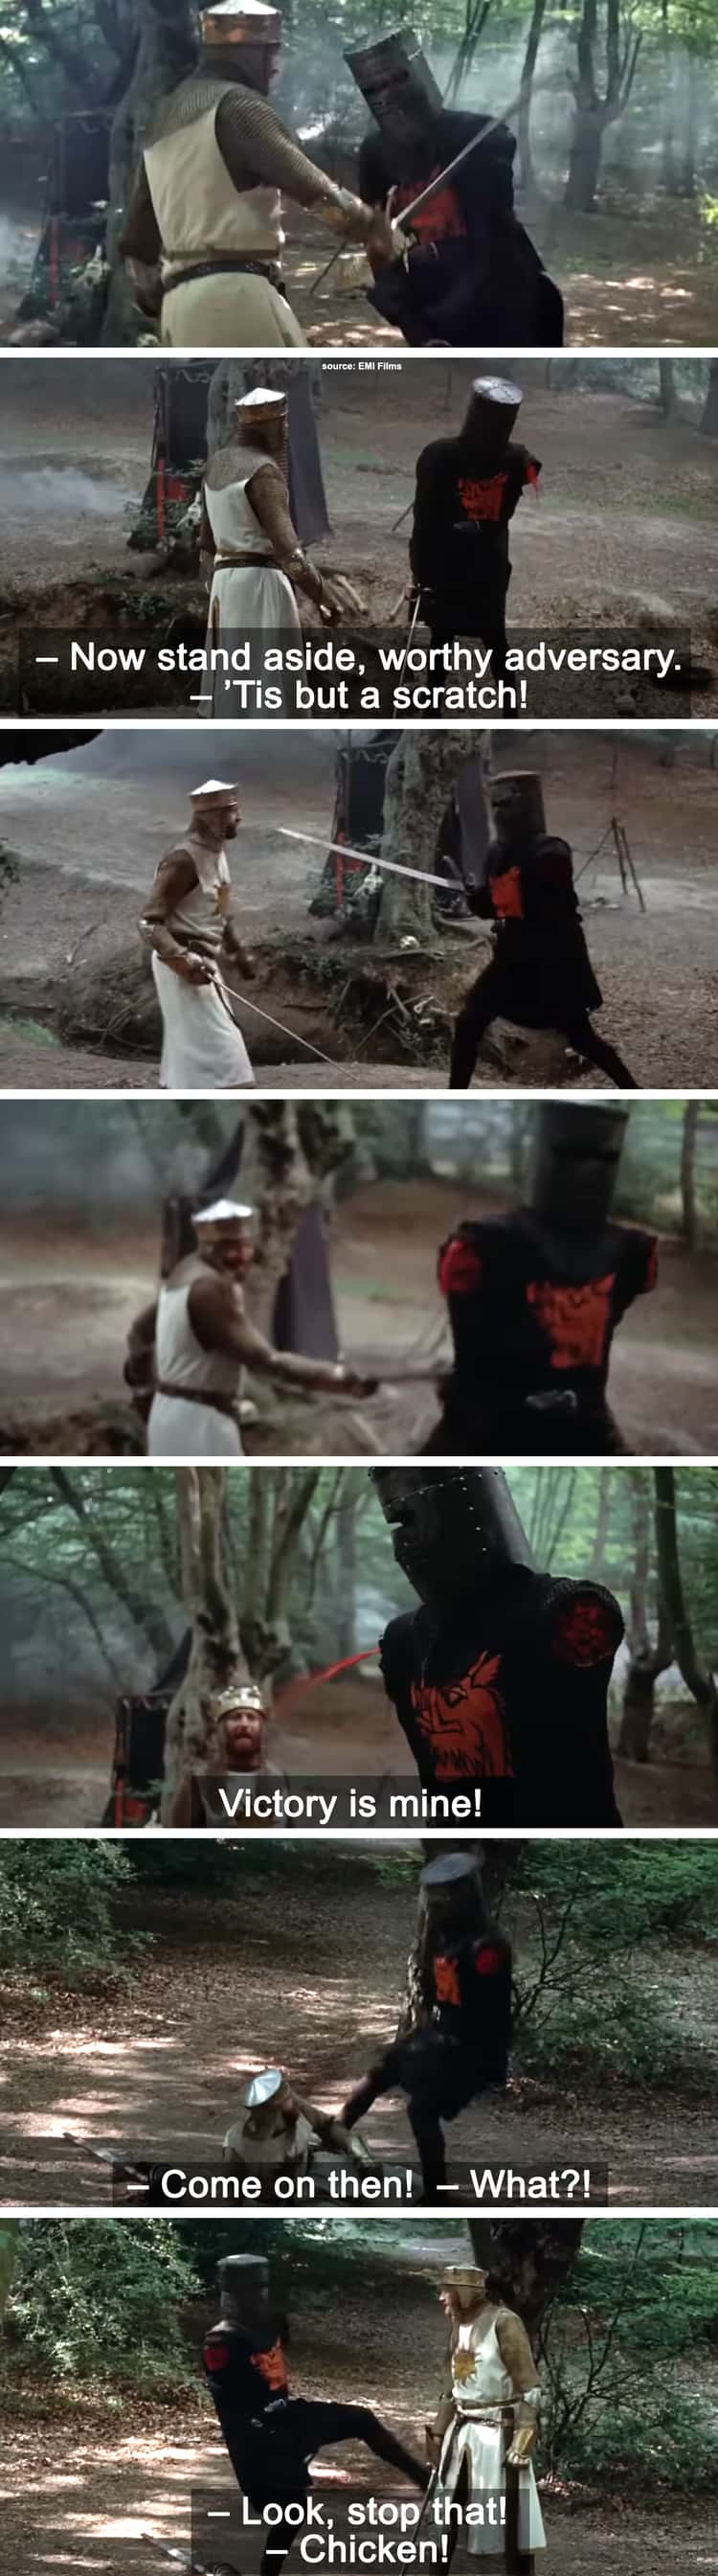 'Monty Python and the Holy Grail' – The Black Knight